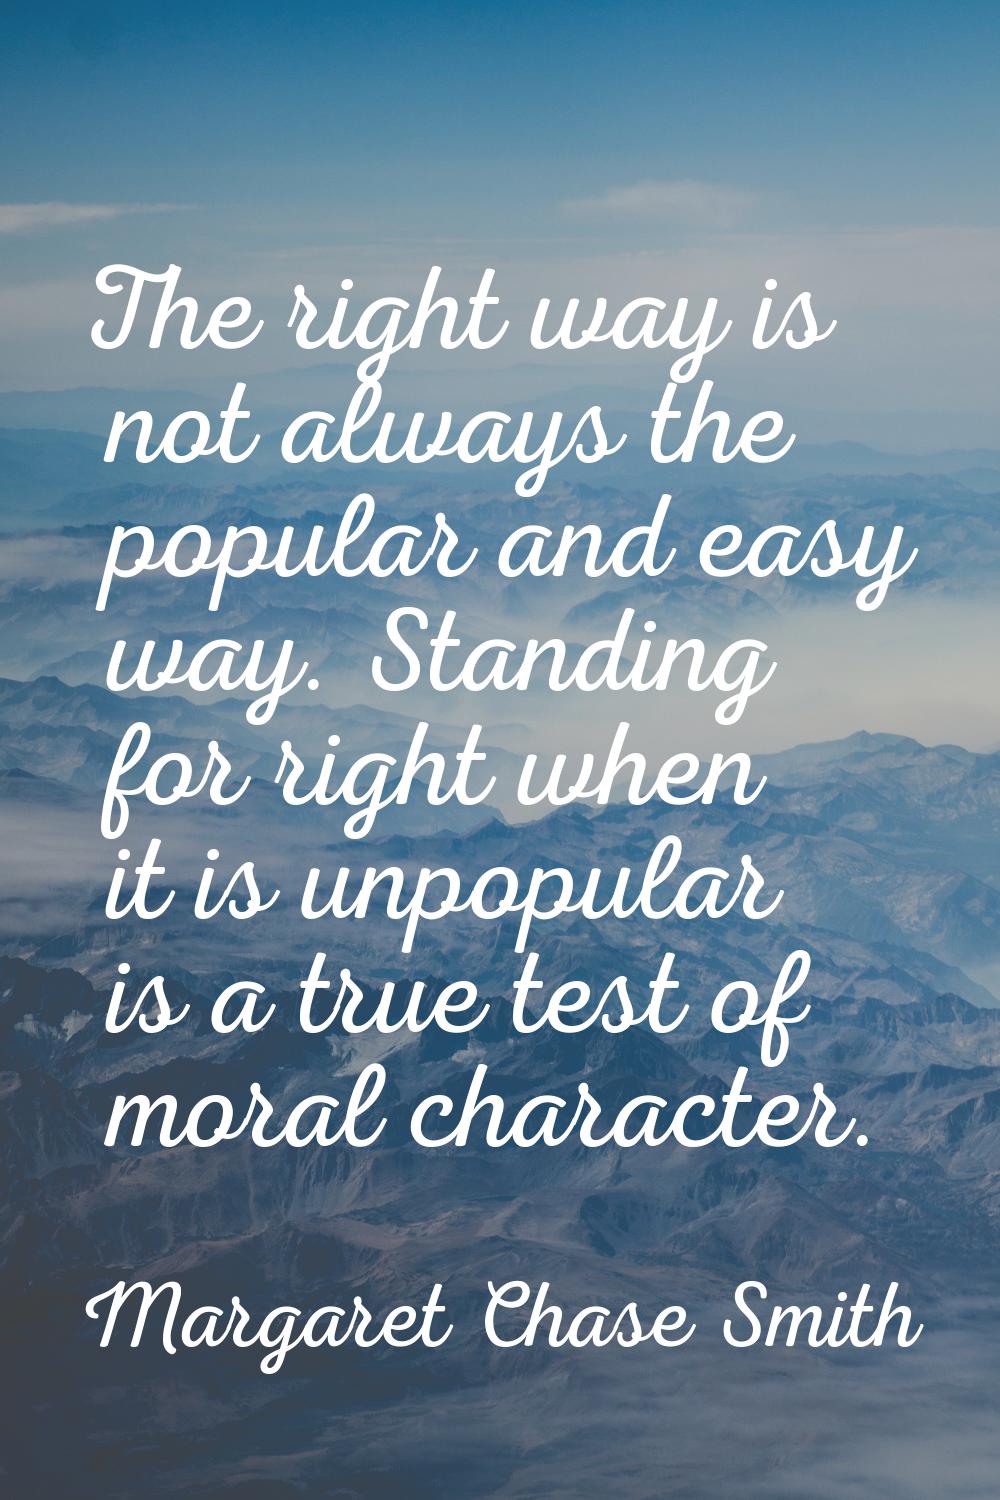 The right way is not always the popular and easy way. Standing for right when it is unpopular is a 